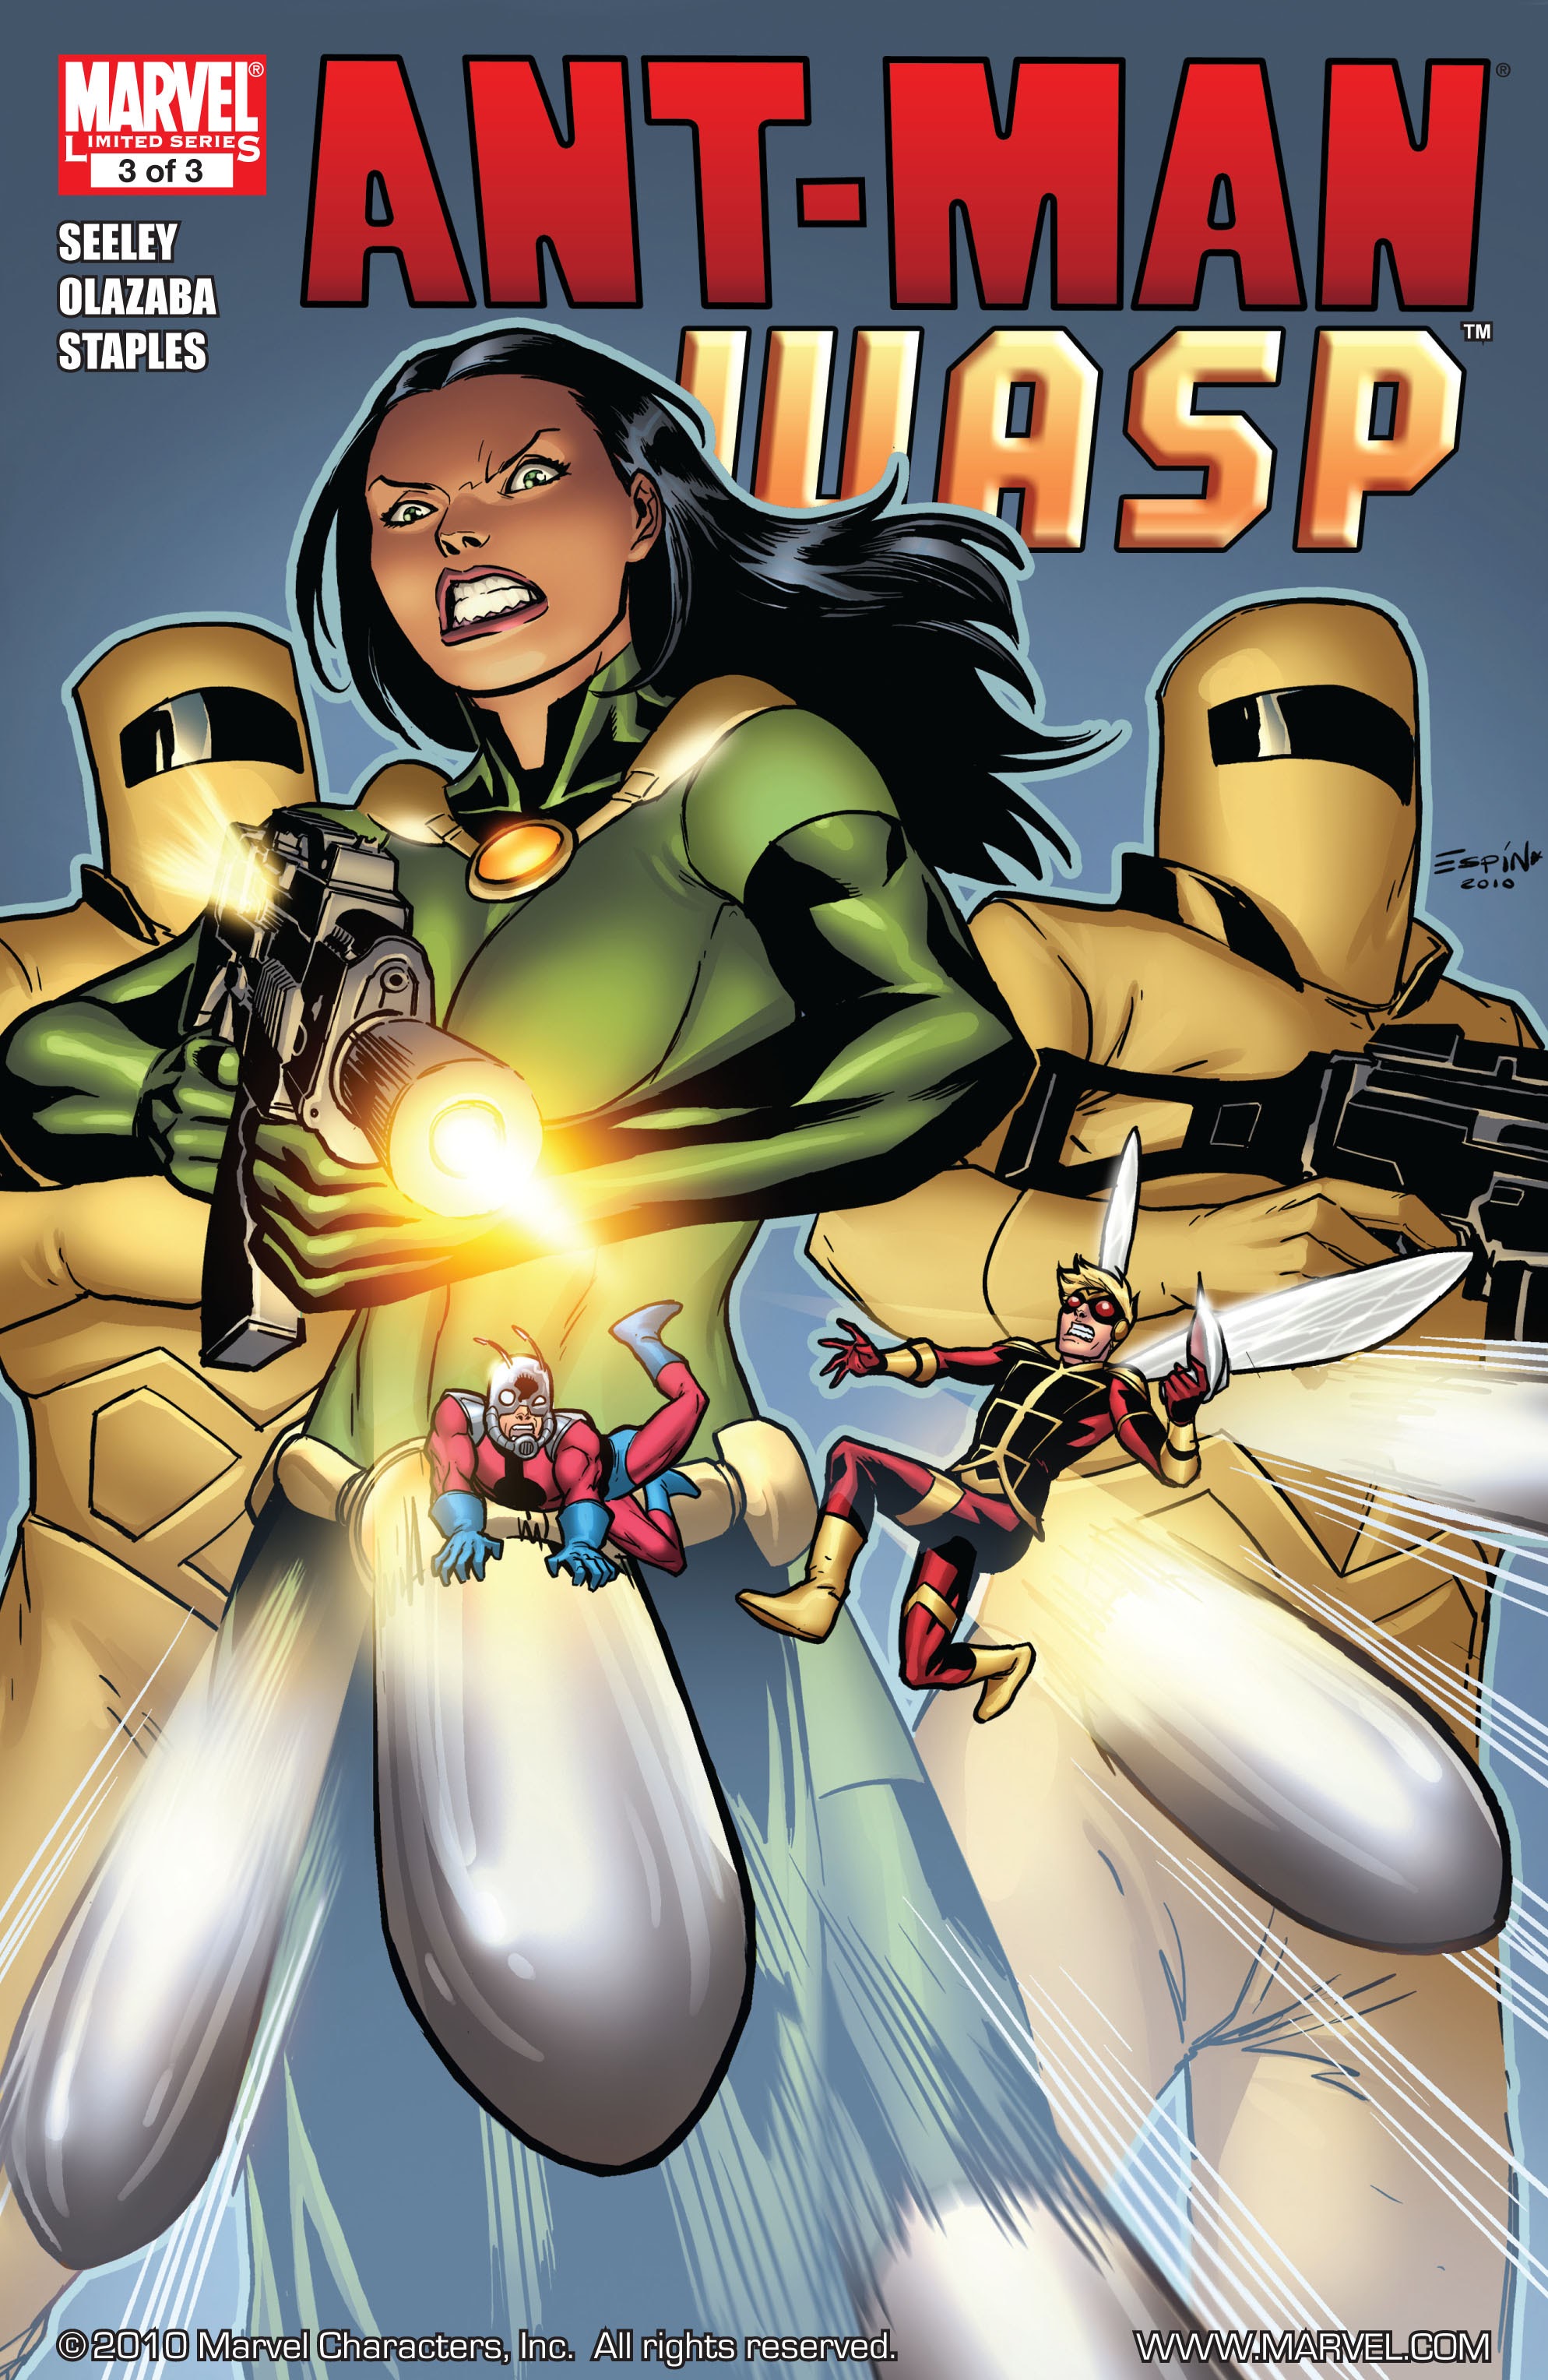 1988px x 3056px - Ant Man Wasp Issue 3 | Read Ant Man Wasp Issue 3 comic online in high  quality. Read Full Comic online for free - Read comics online in high  quality .| READ COMIC ONLINE